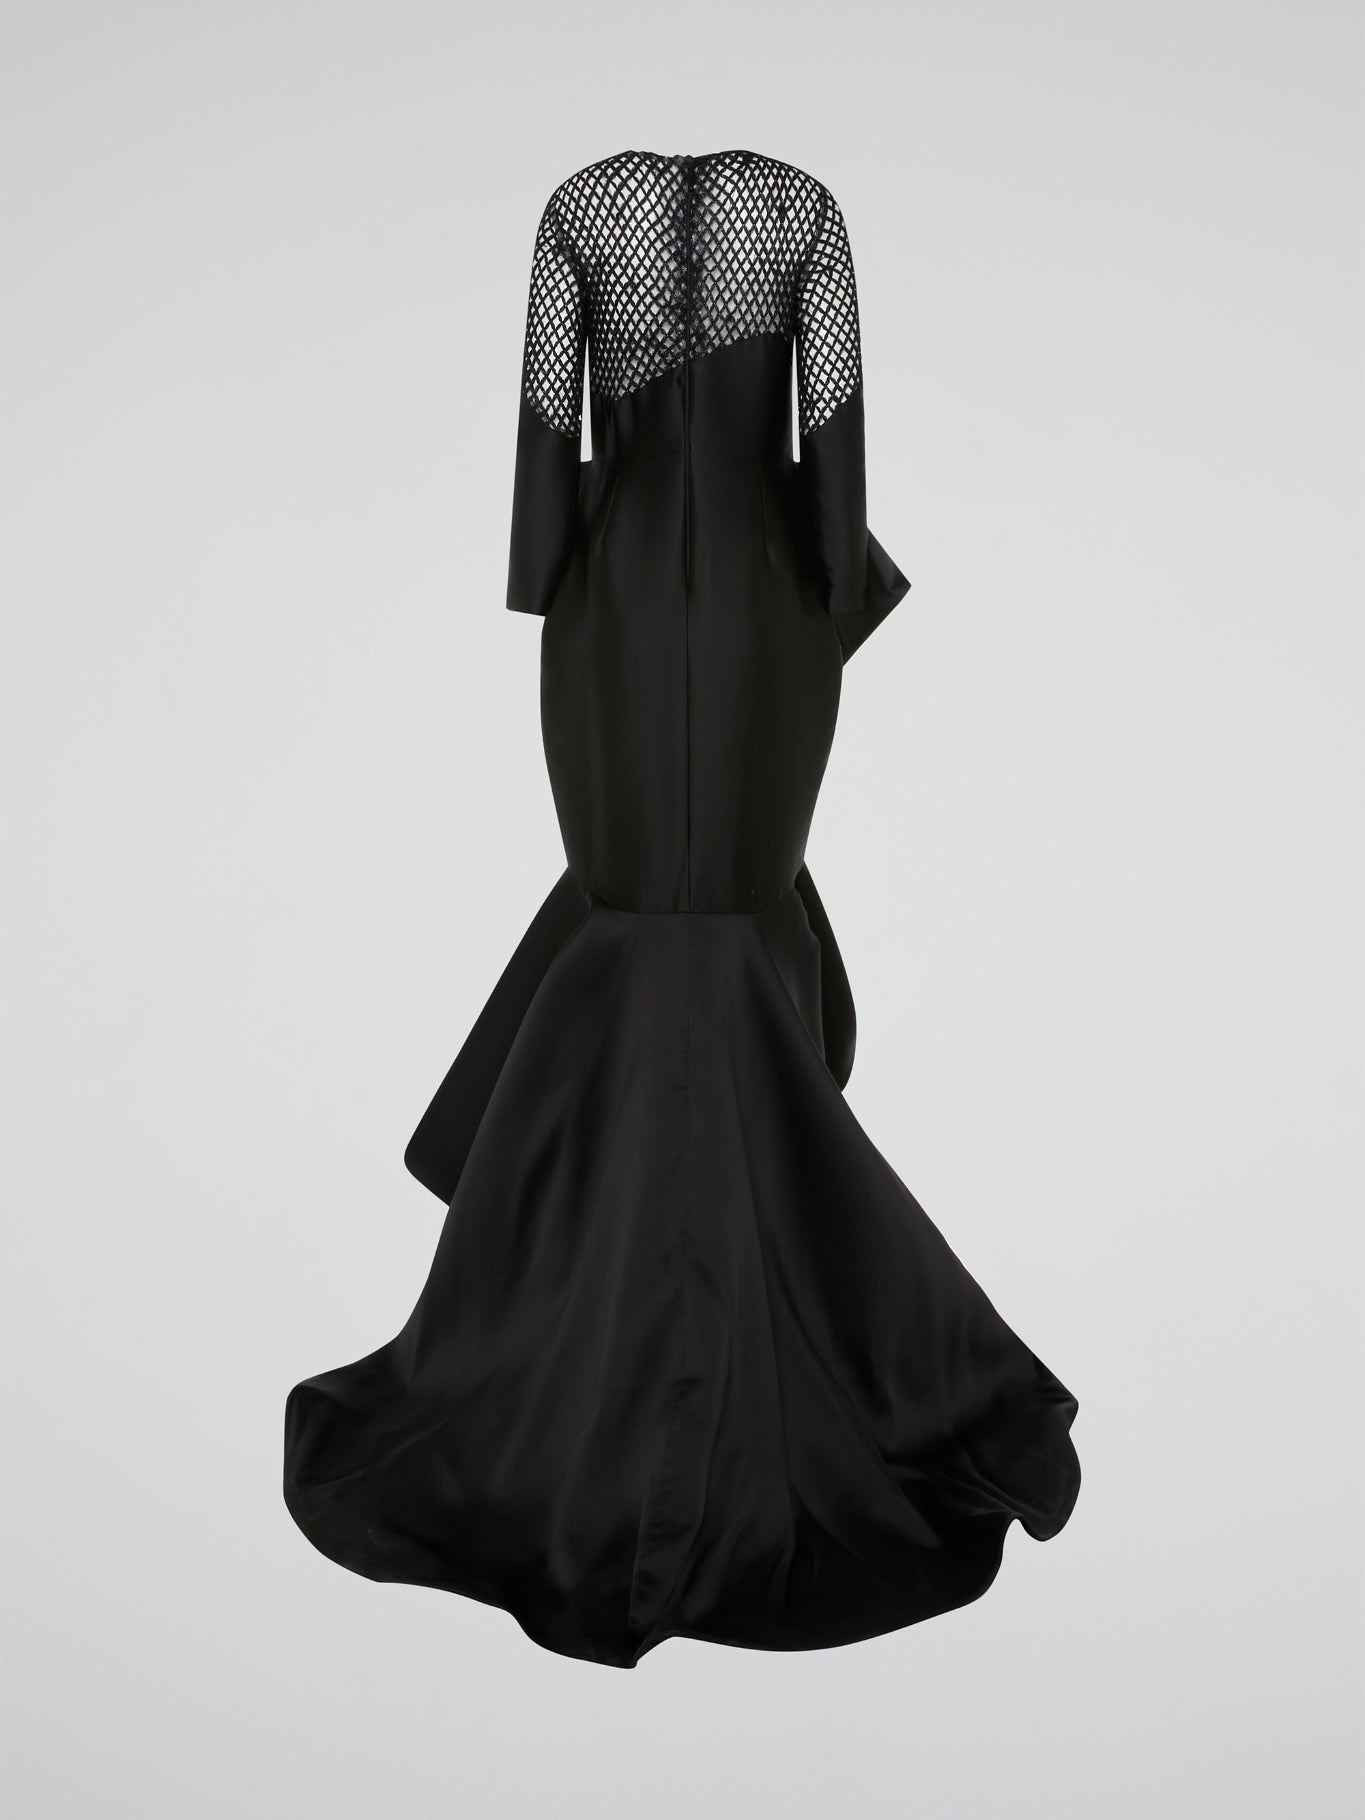 Make a statement in this stunning Black Mesh Bodice Mermaid Gown by Isabel Sanchis. The intricate mesh detailing on the bodice adds a touch of elegance, while the mermaid silhouette hugs your curves in all the right places. Perfect for a formal event or a red carpet soirée, this gown is sure to turn heads and make you feel like a true Hollywood star.